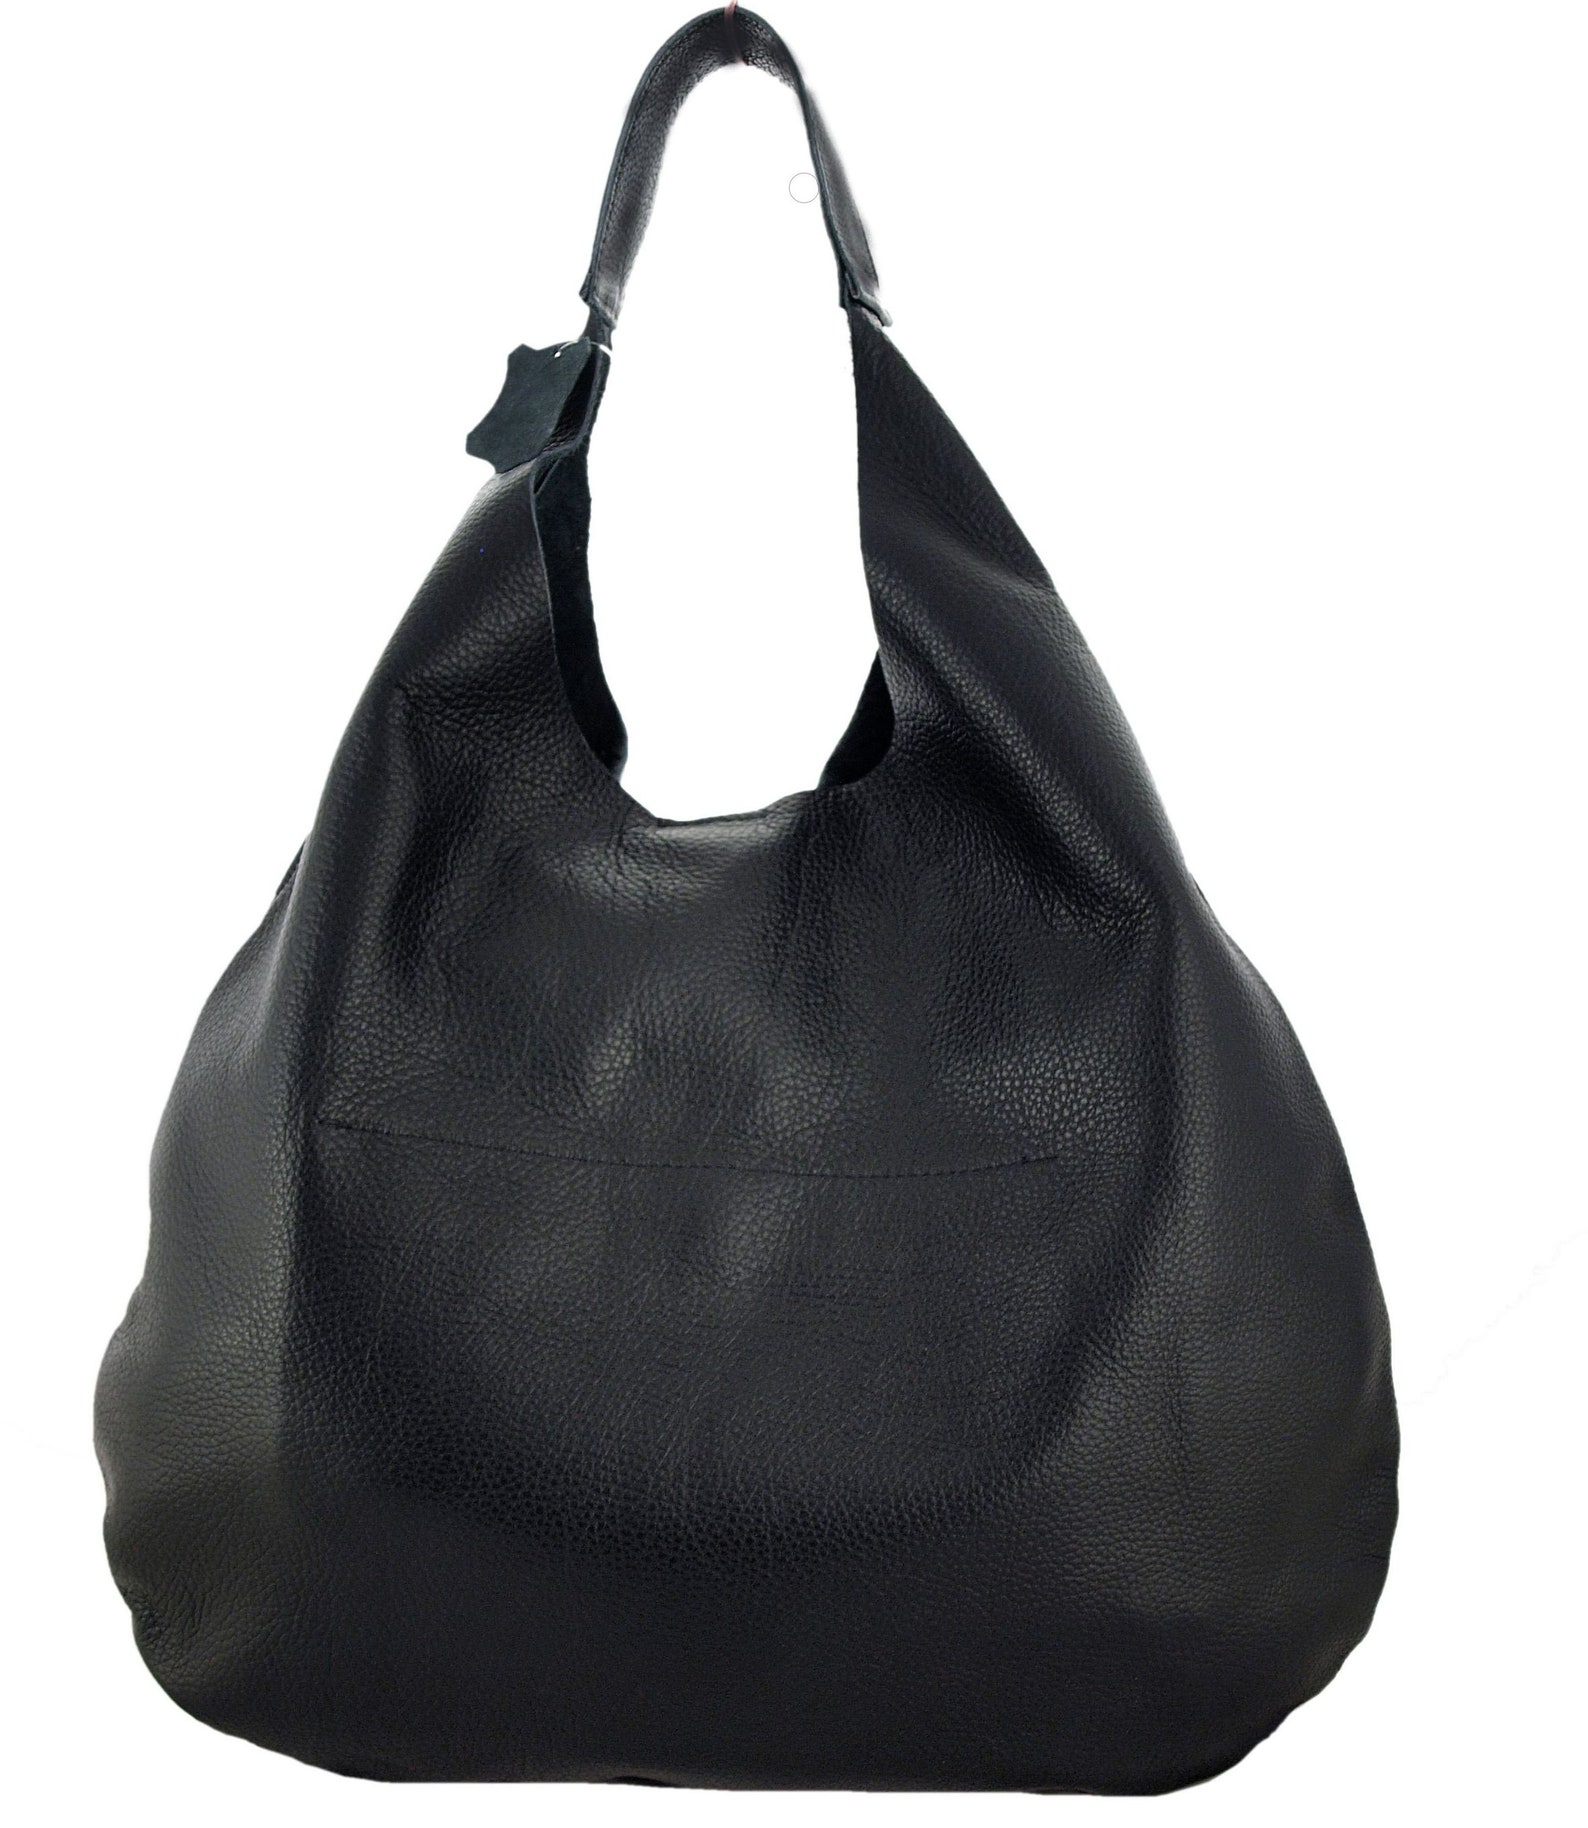 Leather Tote Bag With Pockets Black Handbag for Women - Etsy